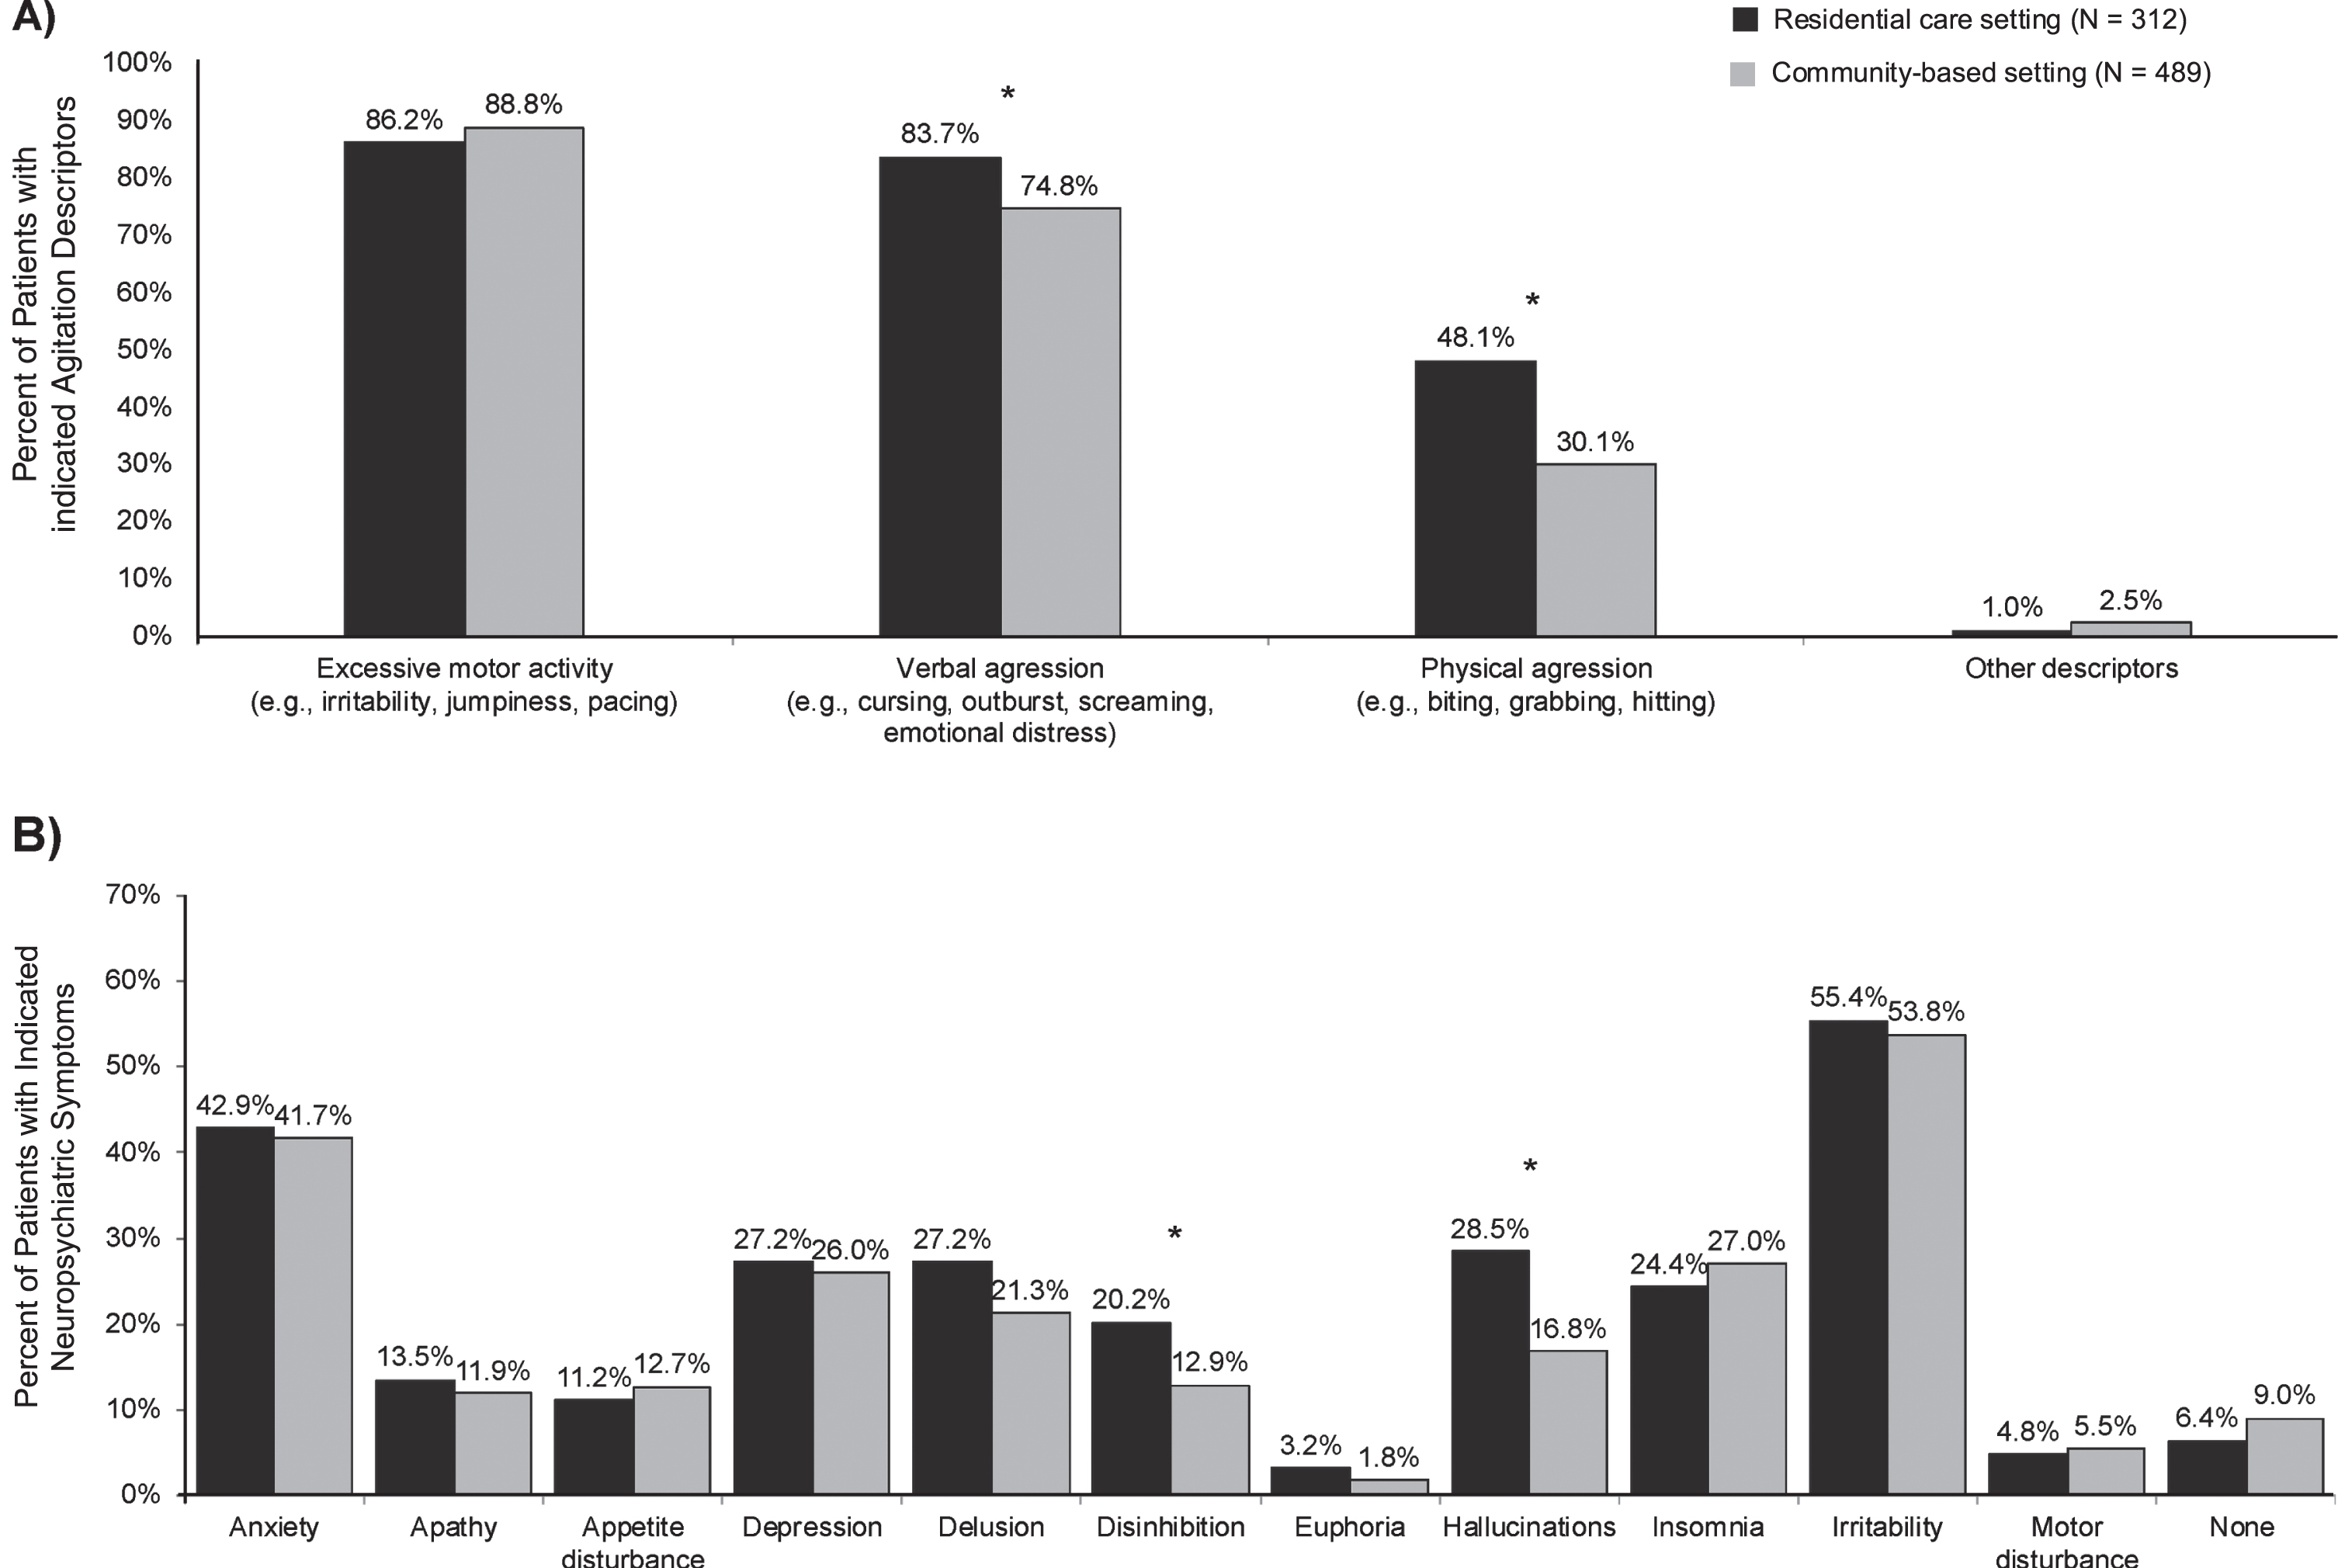 Neuropsychiatric symptoms at the index date for patients with agitation and dementia initiated on an antipsychotic in residential care and community-based settings. A) Agitation descriptors leading to initiation of an antipsychotic. B) Other neuropsychiatric symptoms. *Indicates statistical significance at the 5% level.